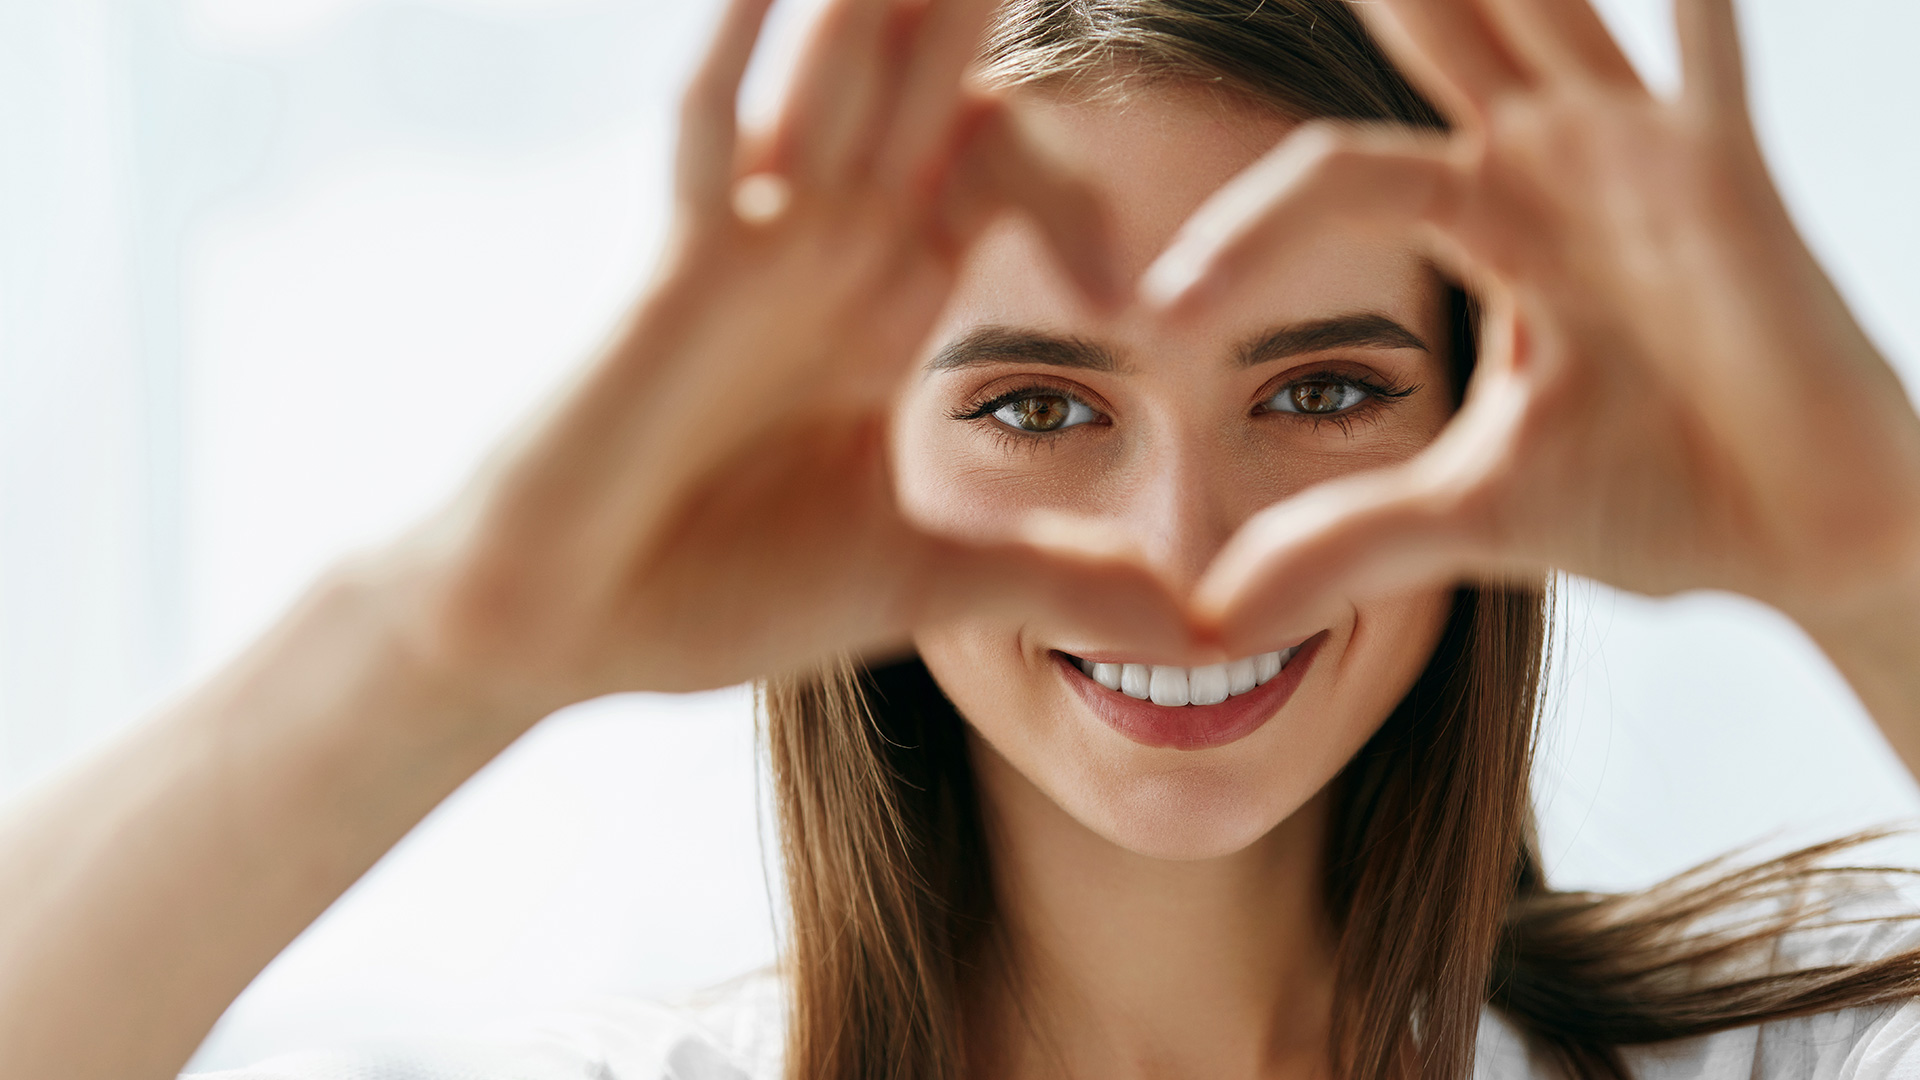 Brunette woman forming the shape of a love heart with her fingers in front of her face, framing her eyes. She is smiling.